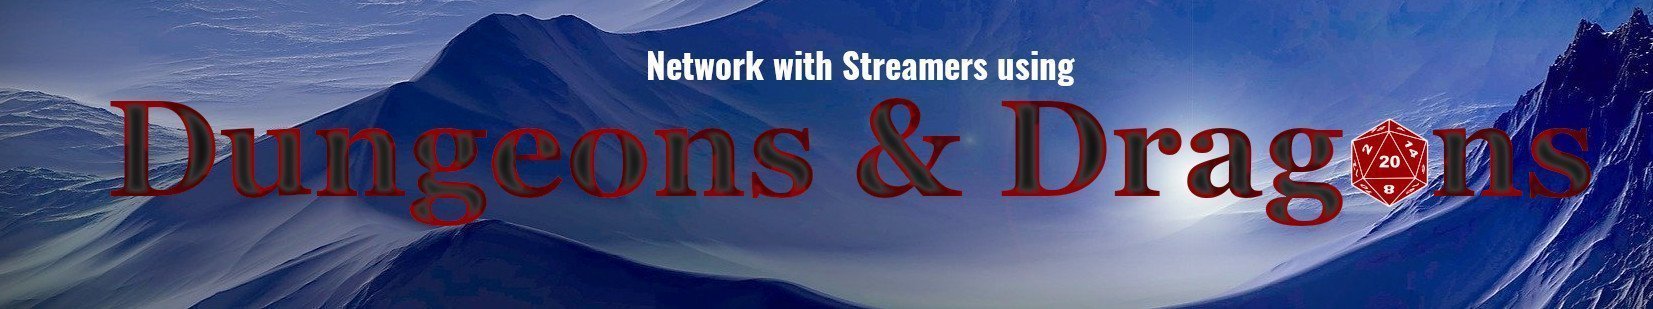 Network with Streamers in a legendary game